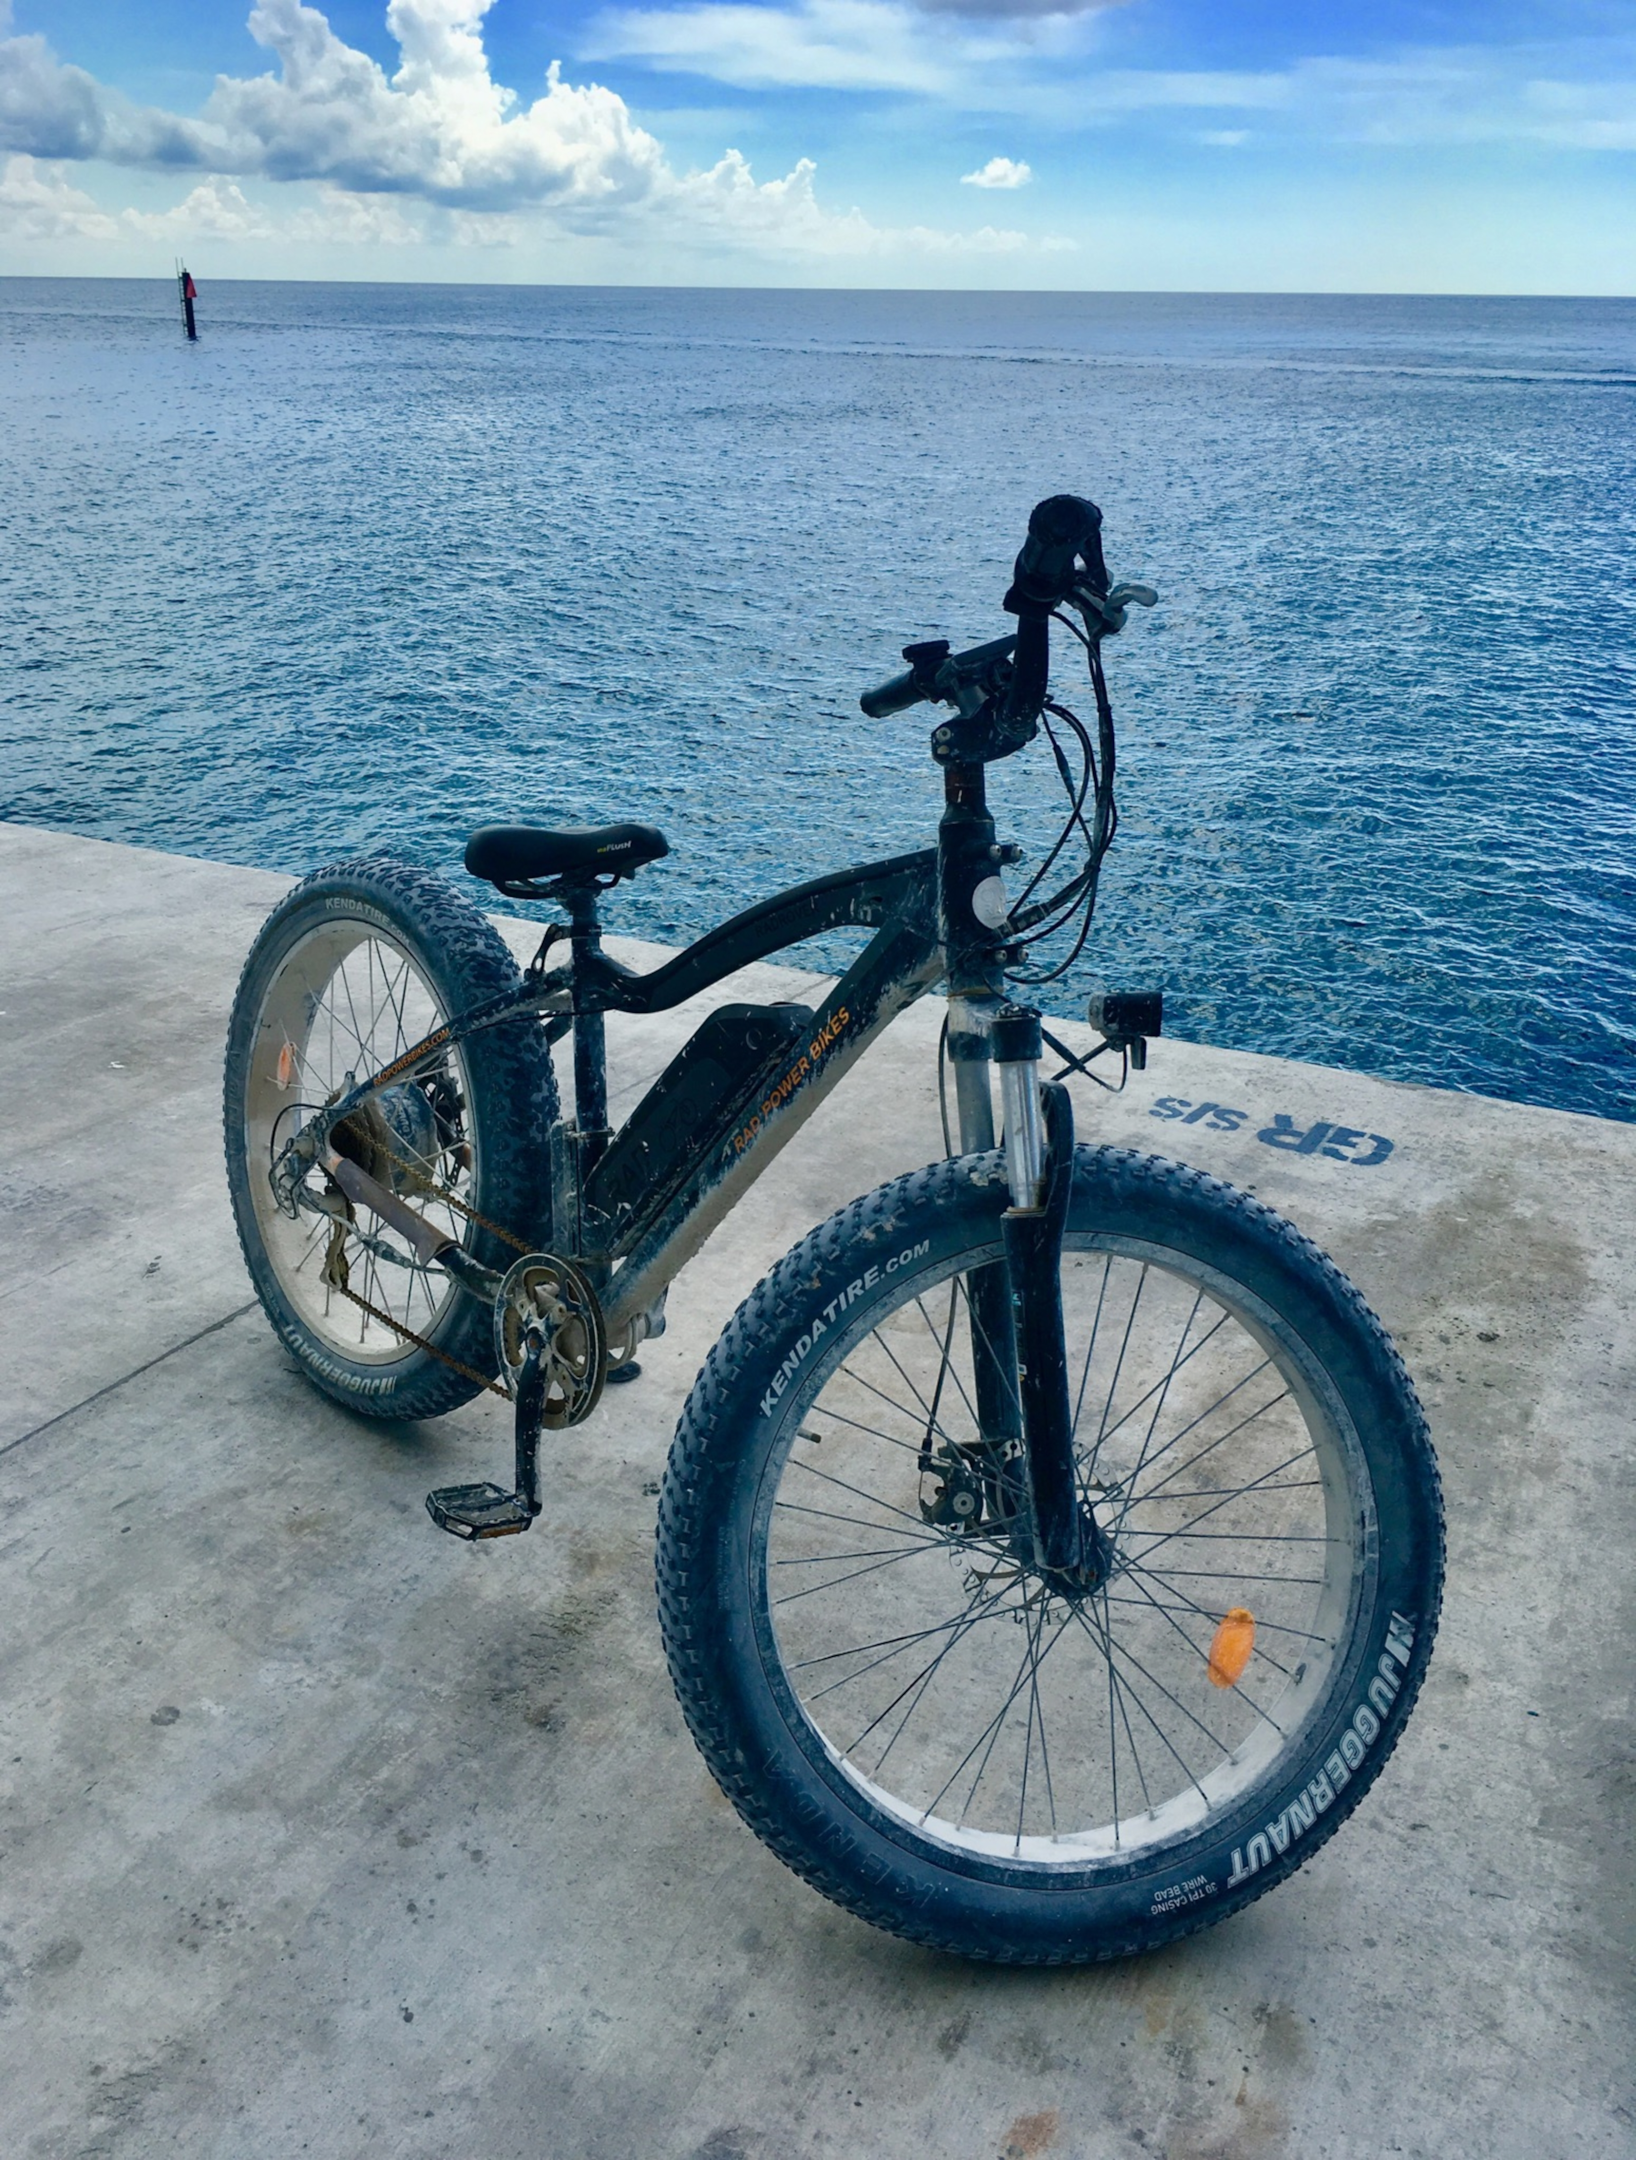 A person riding an electric fat bike with a motor and battery